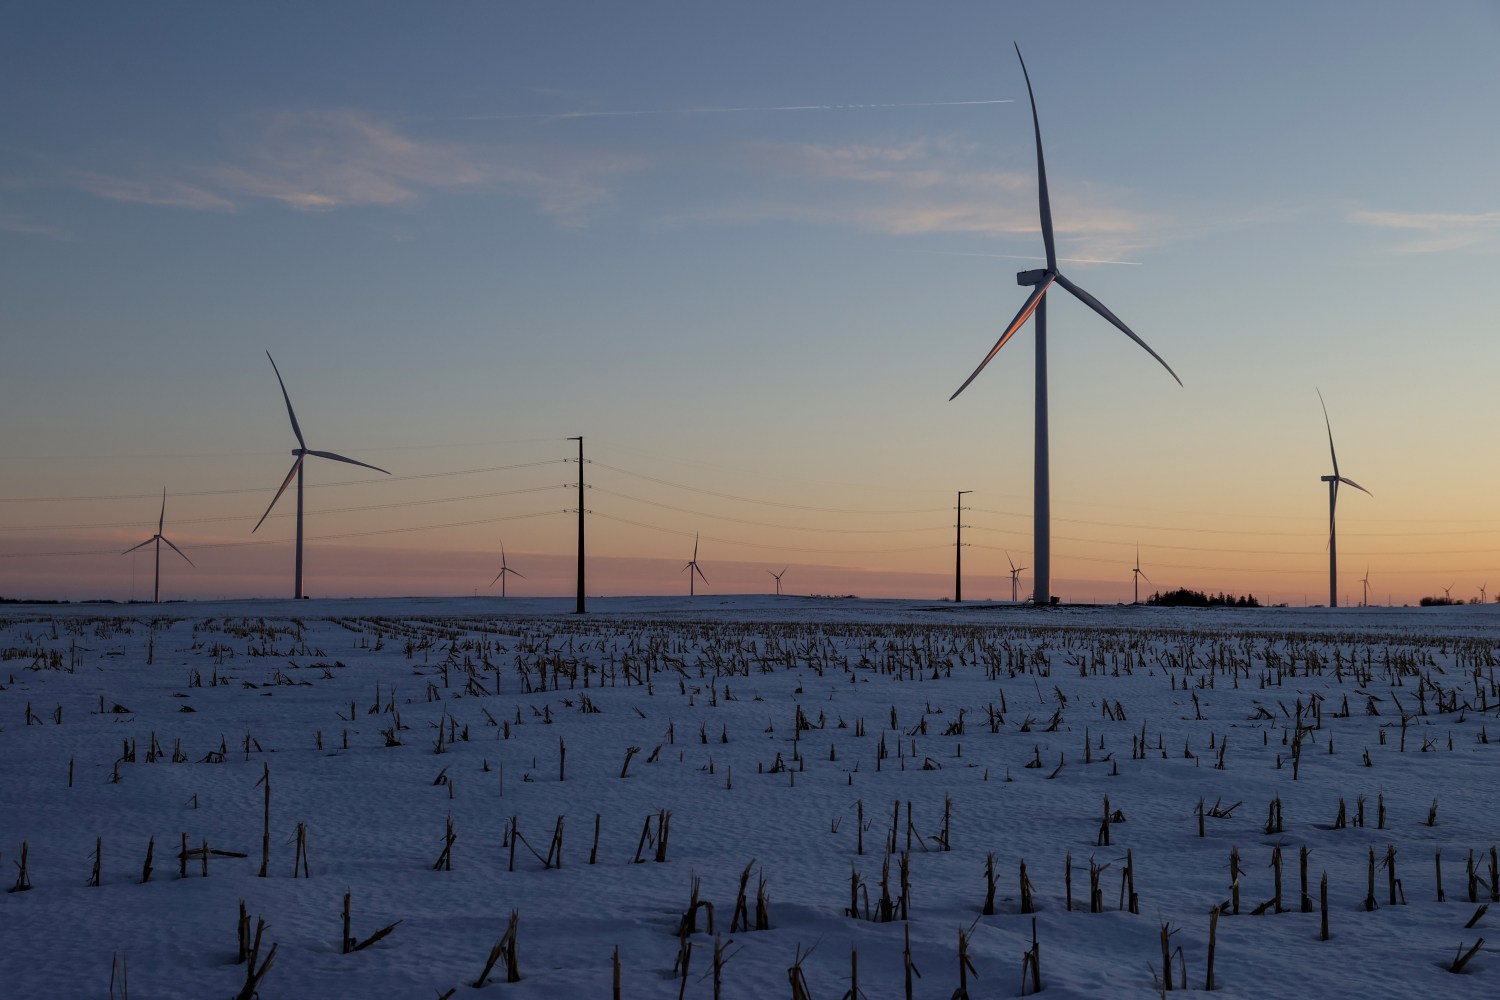 FILE PHOTO: A wind farm shares space with corn fields the day before the Iowa caucuses, where agriculture and clean energy are key issues, in Latimer, Iowa, U.S. February 2, 2020. REUTERS/Jonathan Ernst/File Photo